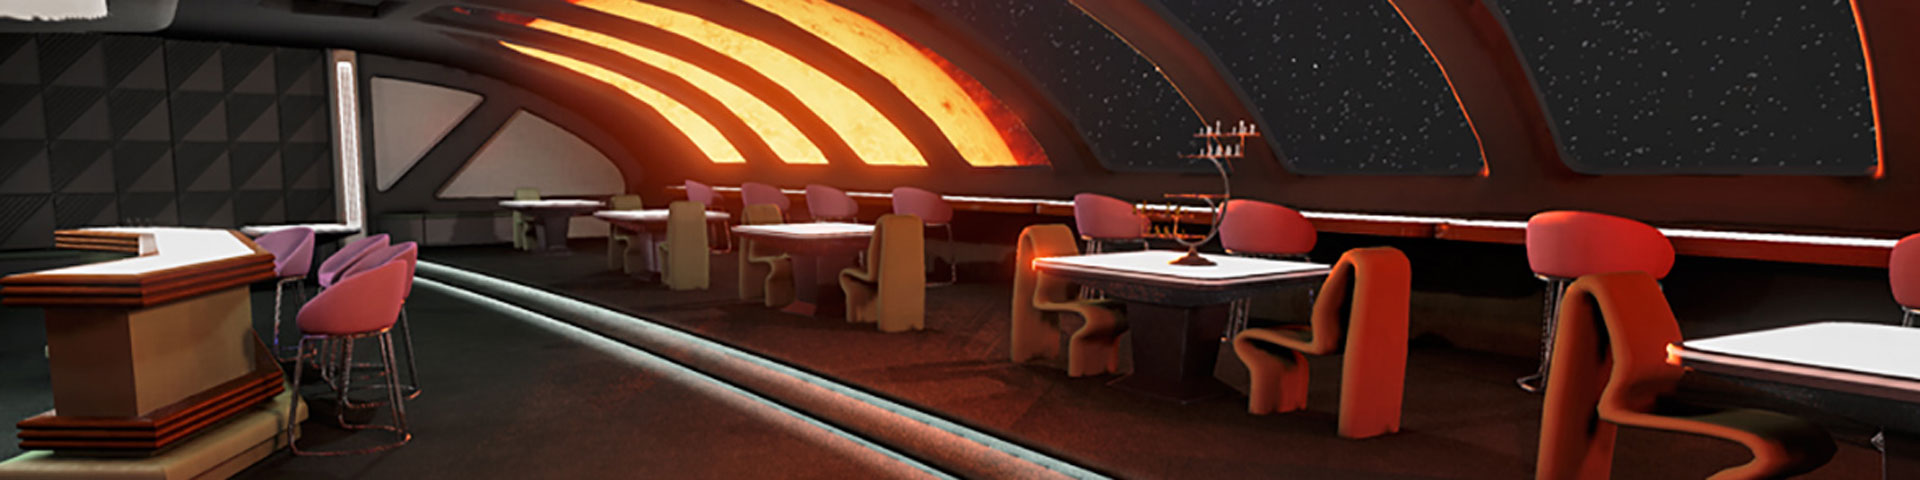 A lounge in space. A bar can be seen to the left; tables with seats look out on space on the right